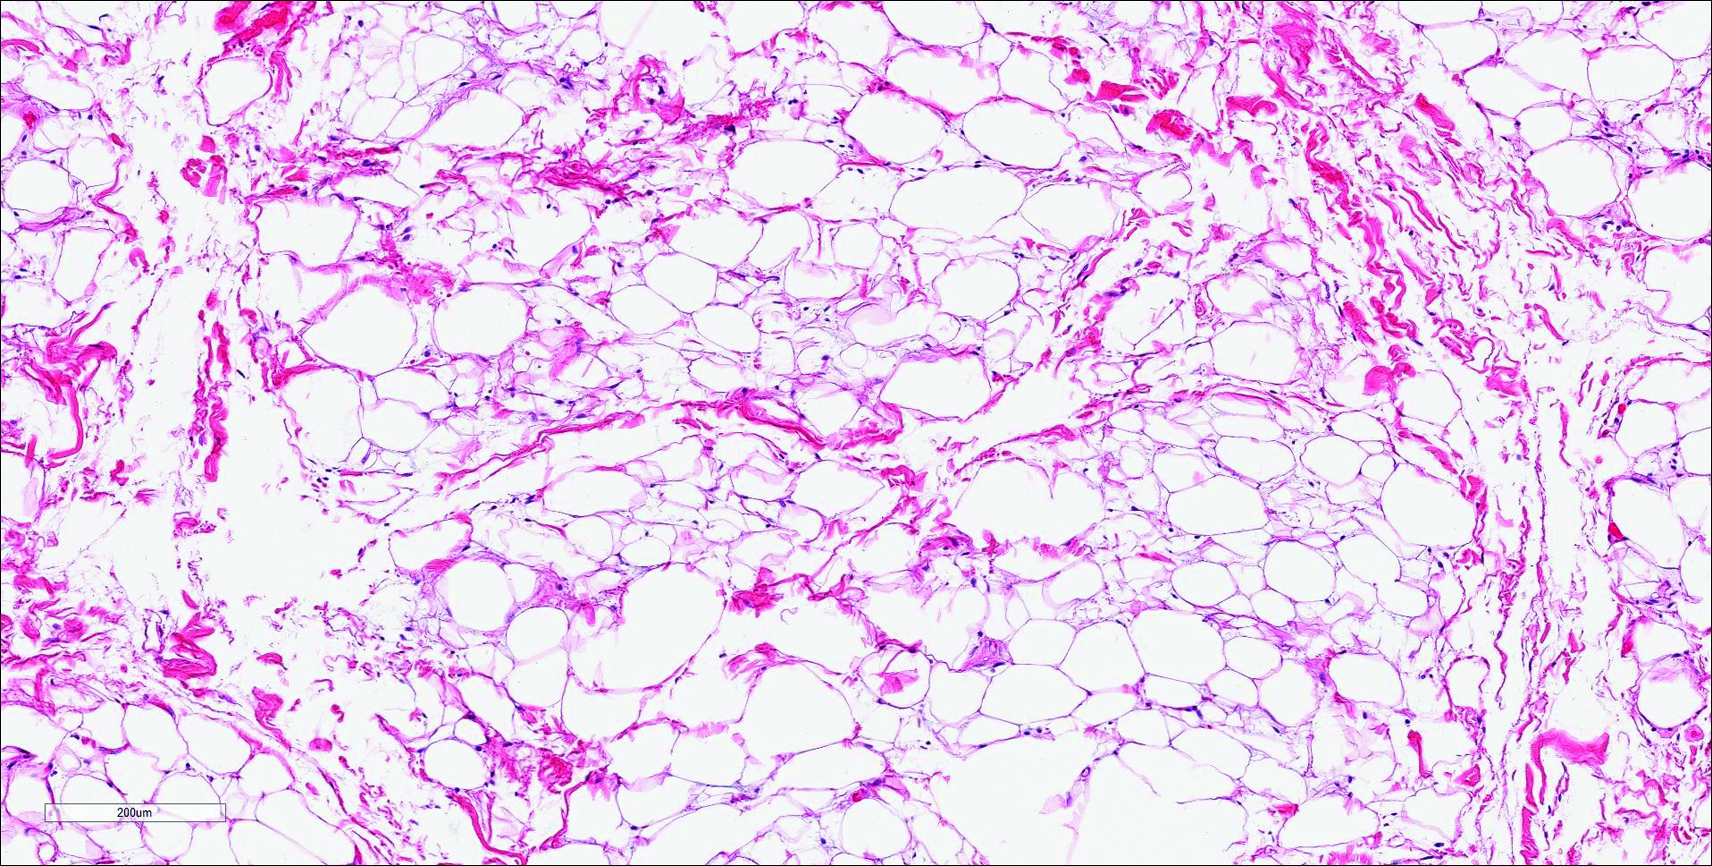 spindle cells and ropey collagen- found in spindle cell lipomas